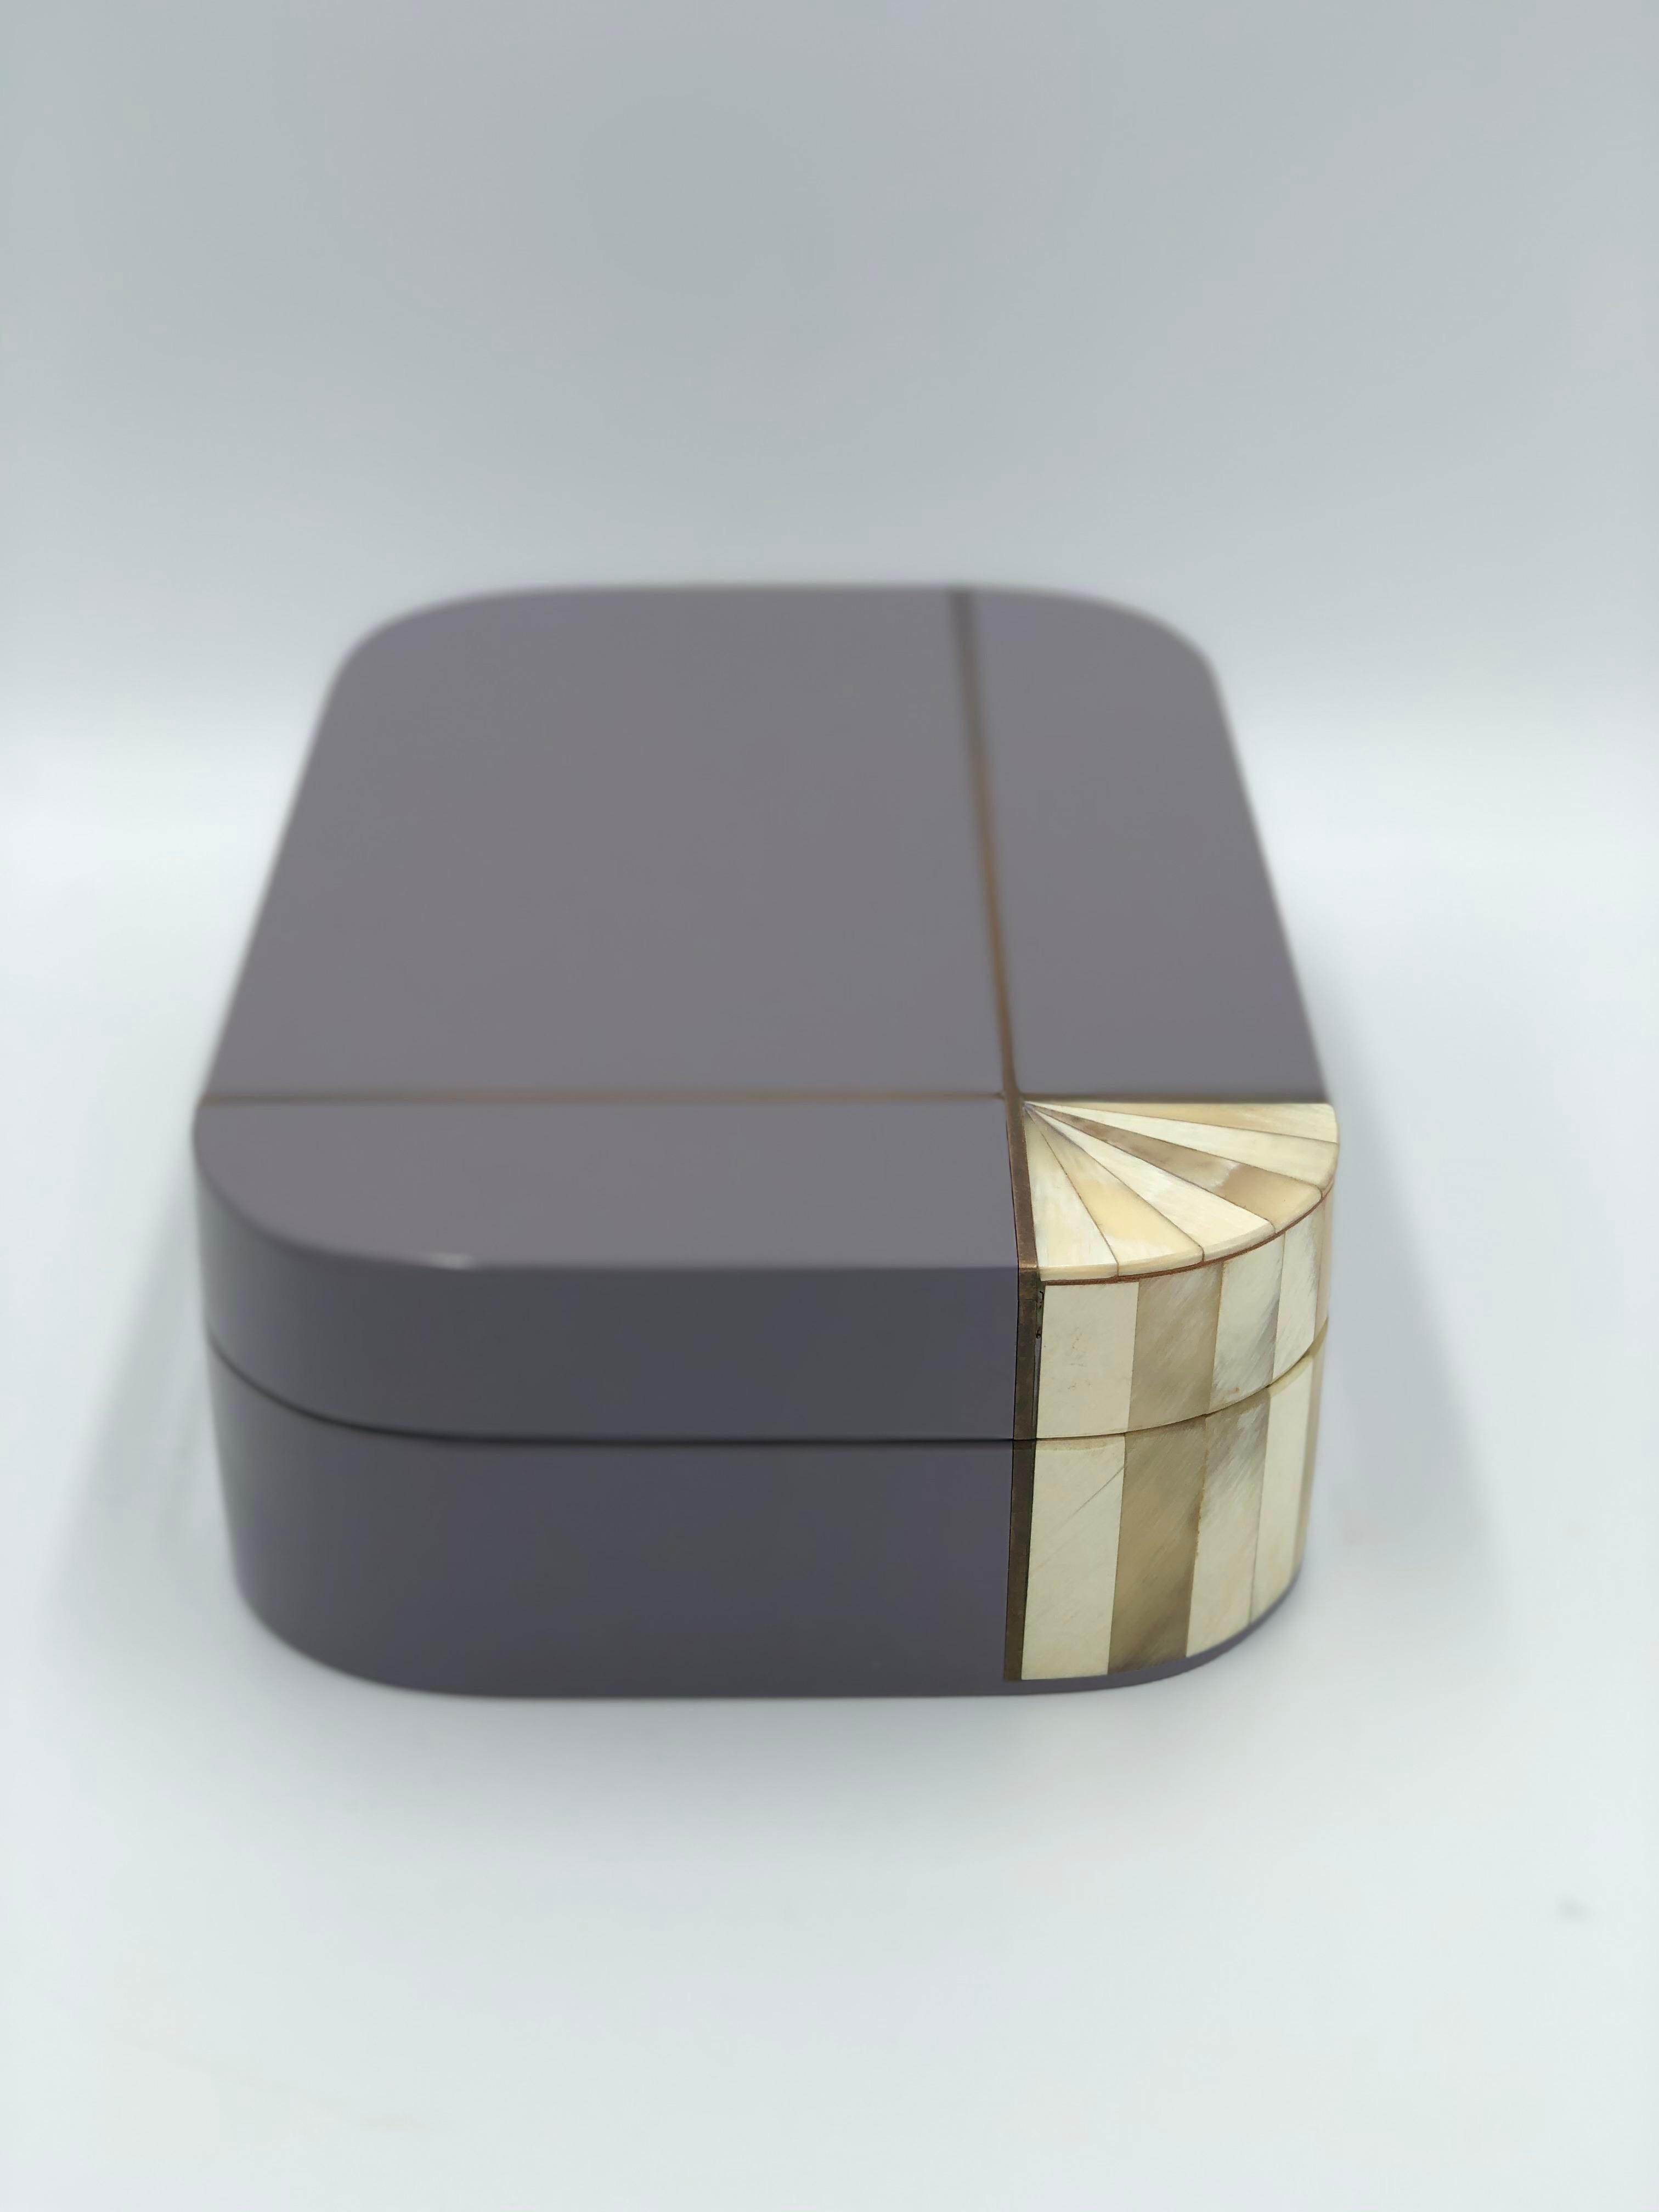 Stunning Lacquer Lidded Box made in Italy. Lavender lacquer offset with Brass Piping and Bone corner detail.
Wood lined with a tight fit.

Matching picture frame listed separately.